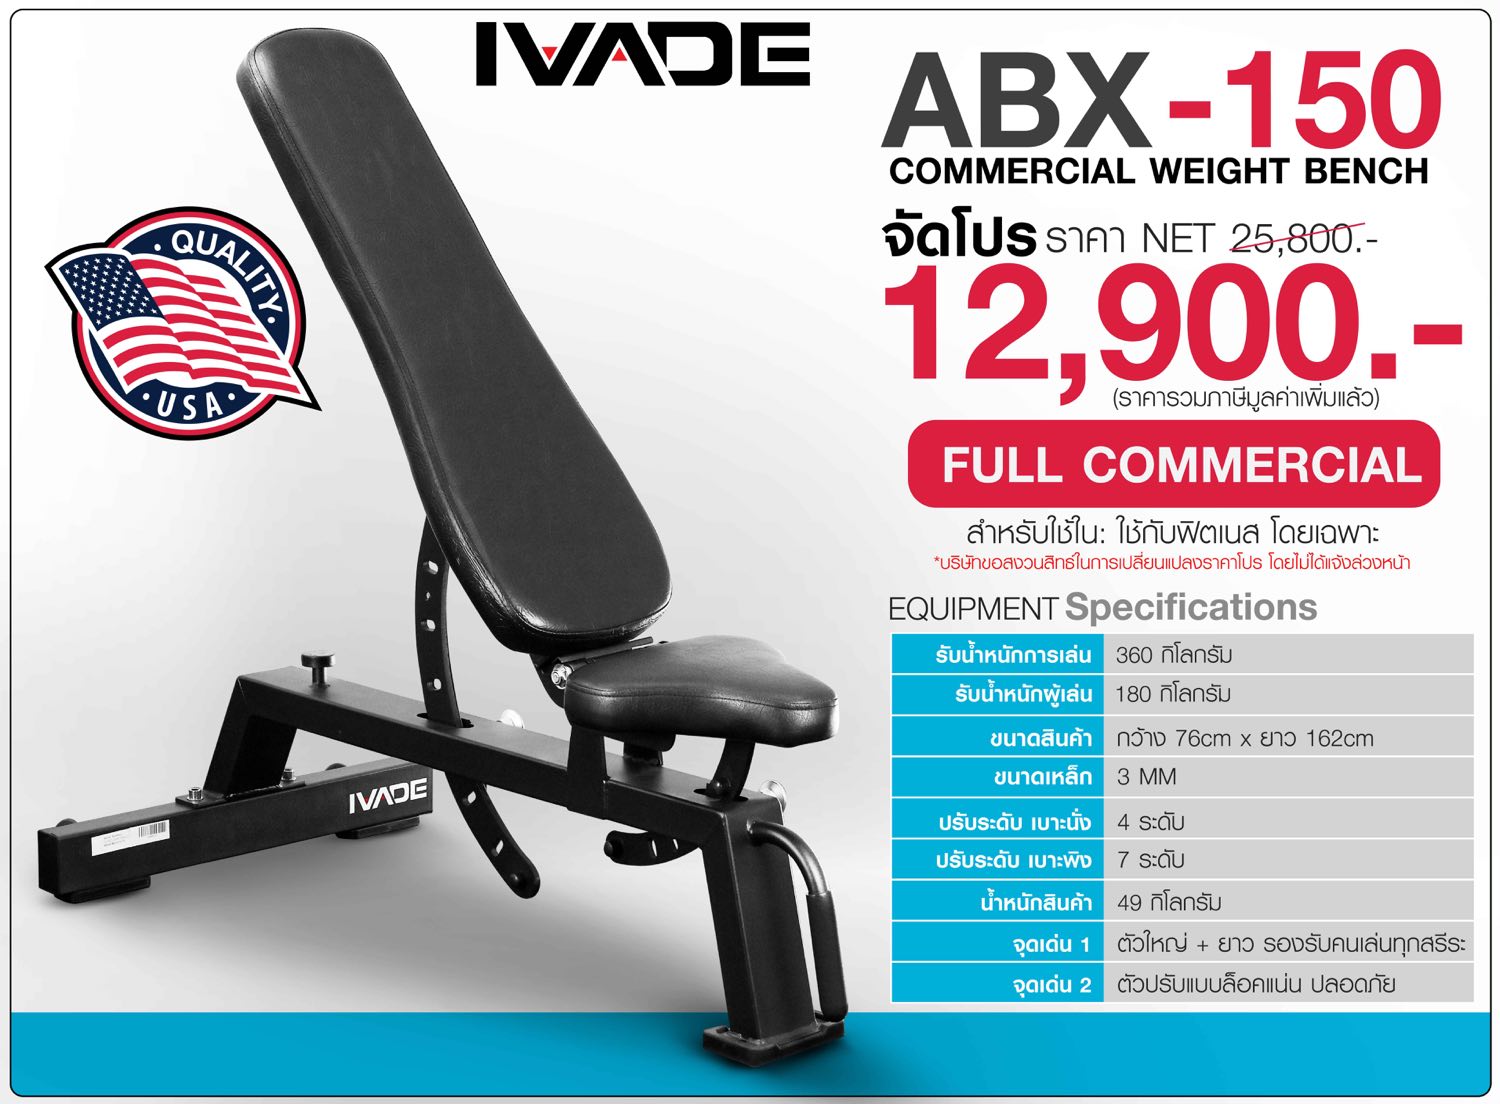 abx150-ivade-1